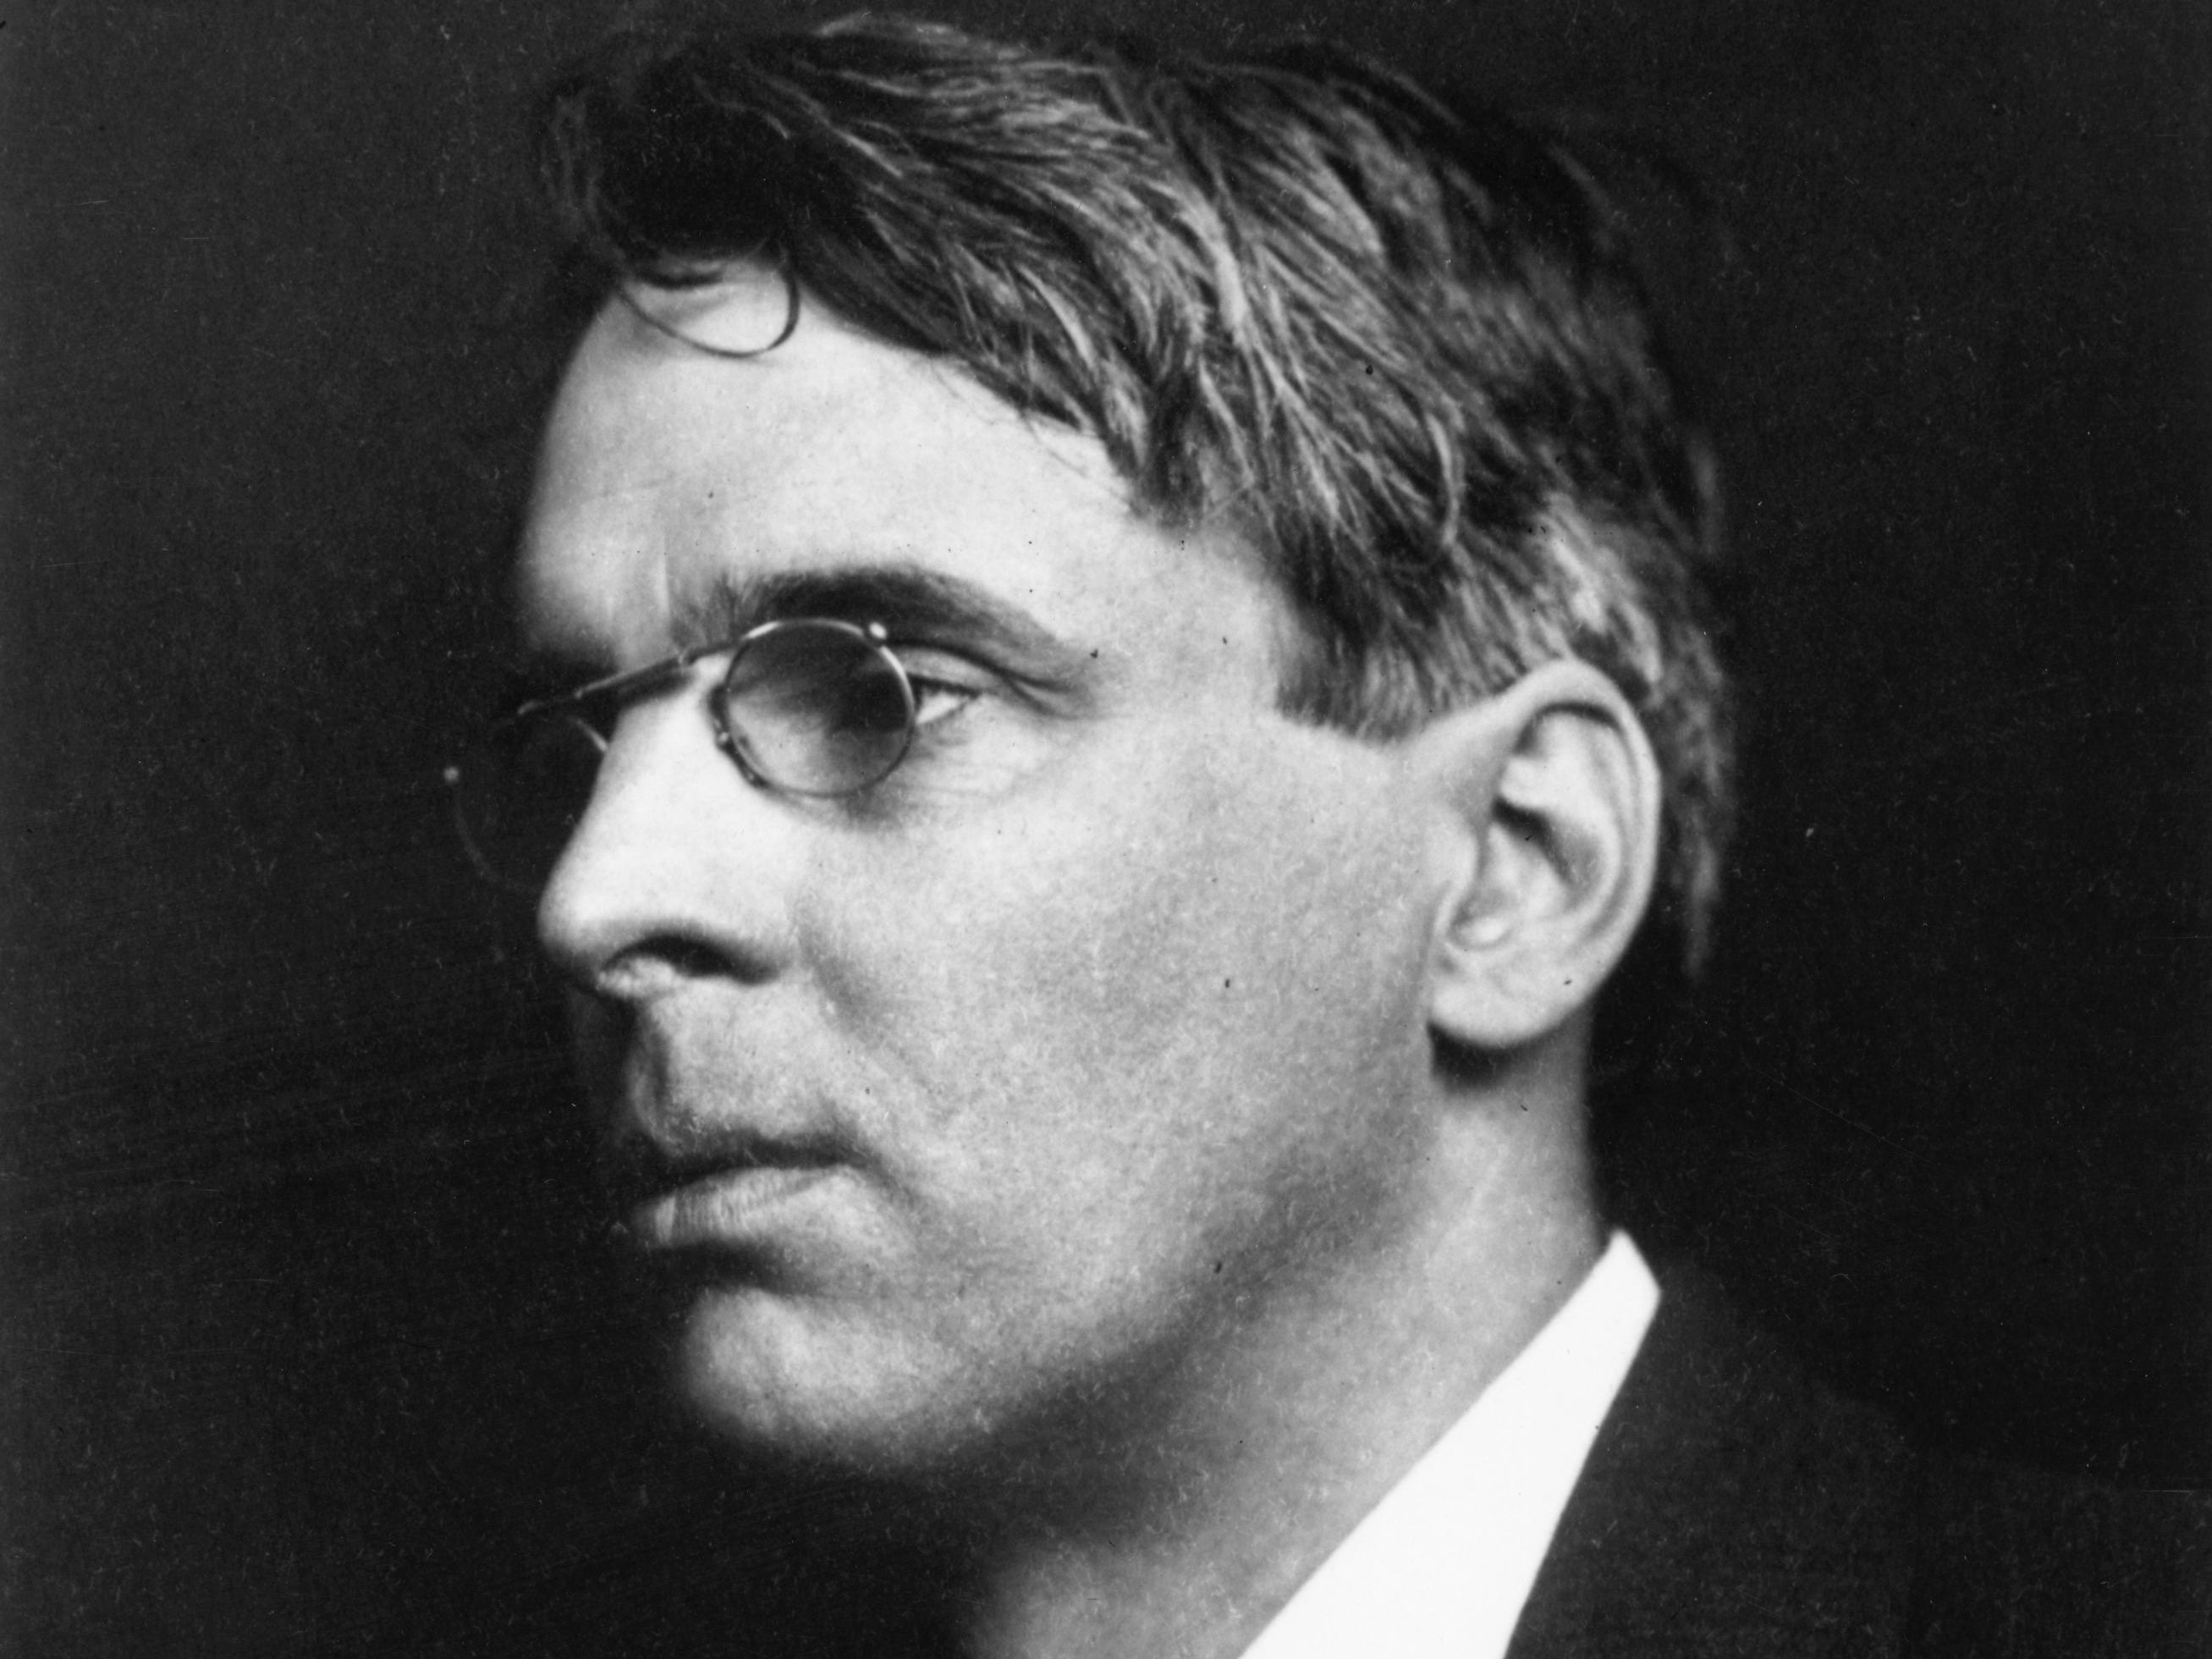 William Butler Yeats in about 1900